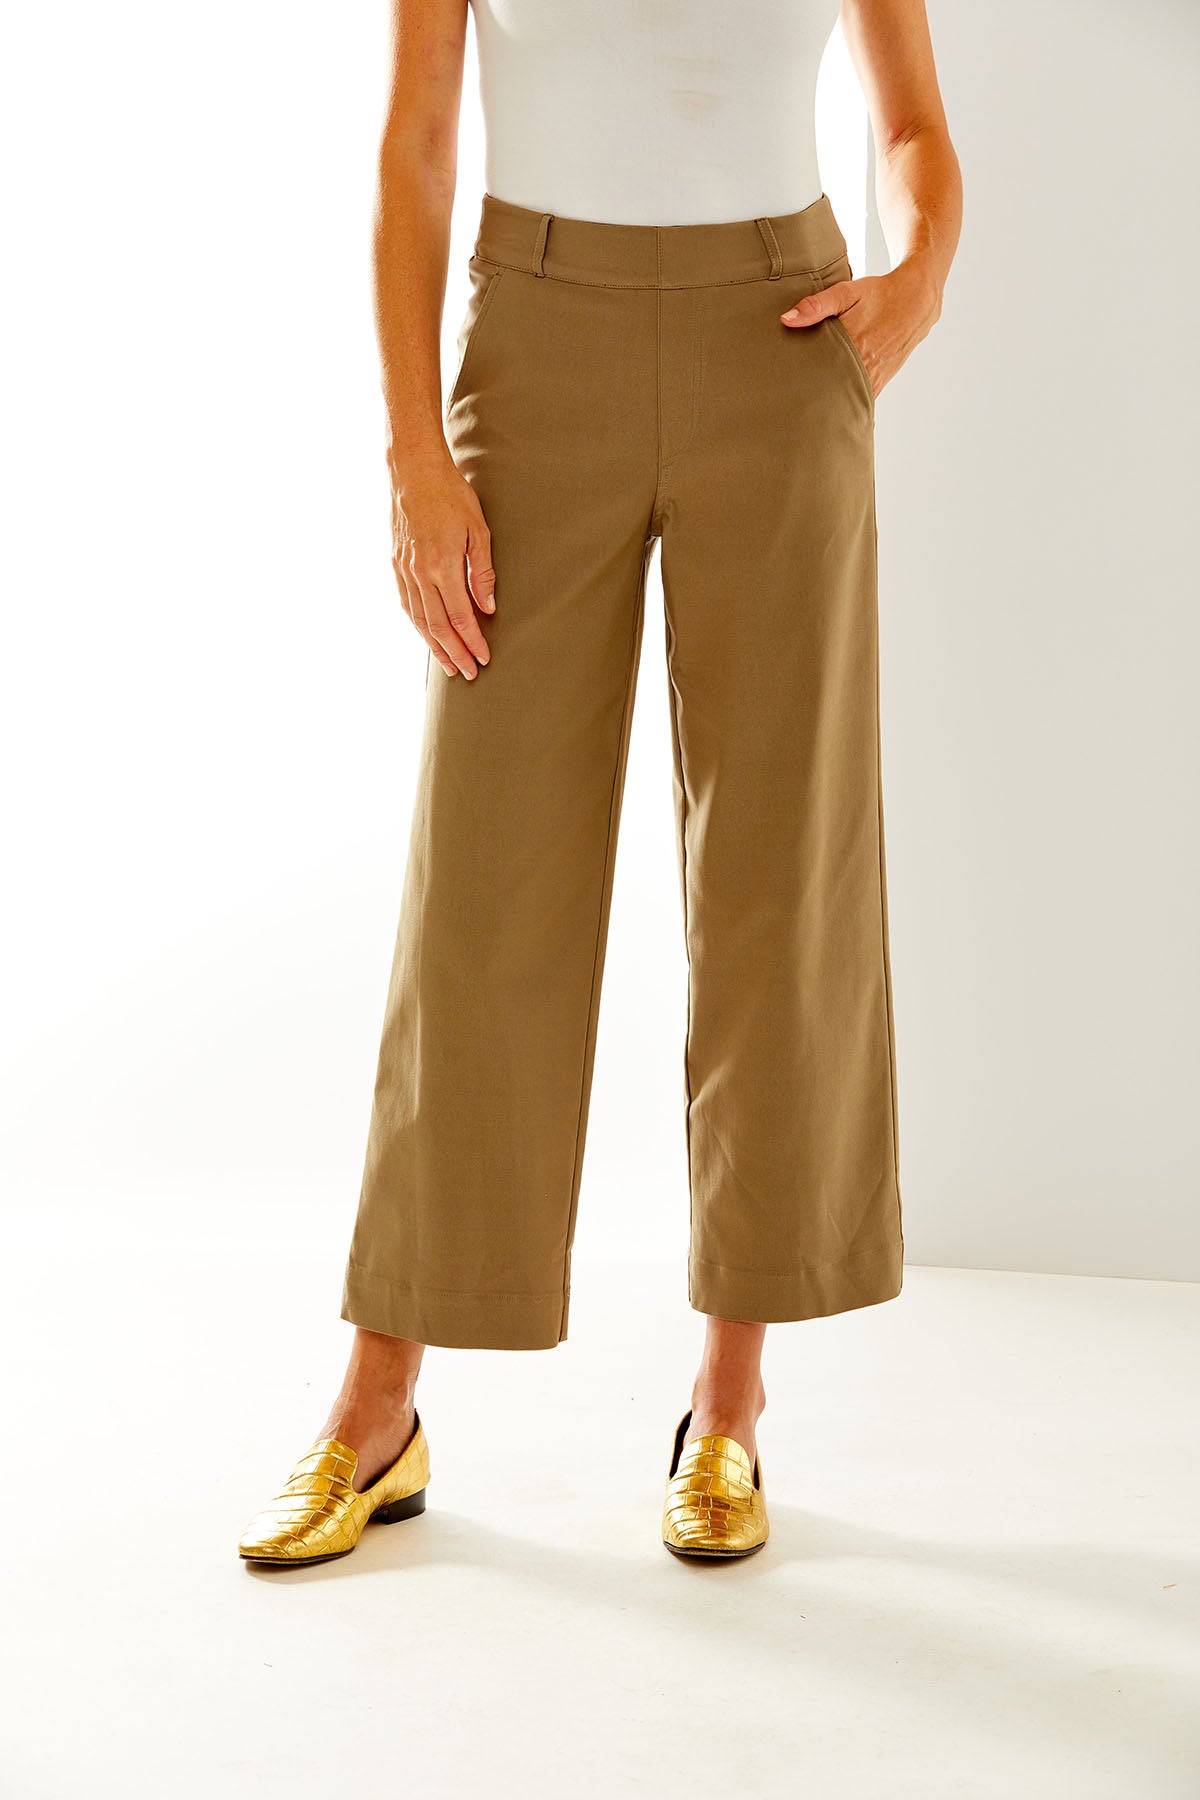 The Willow Pants